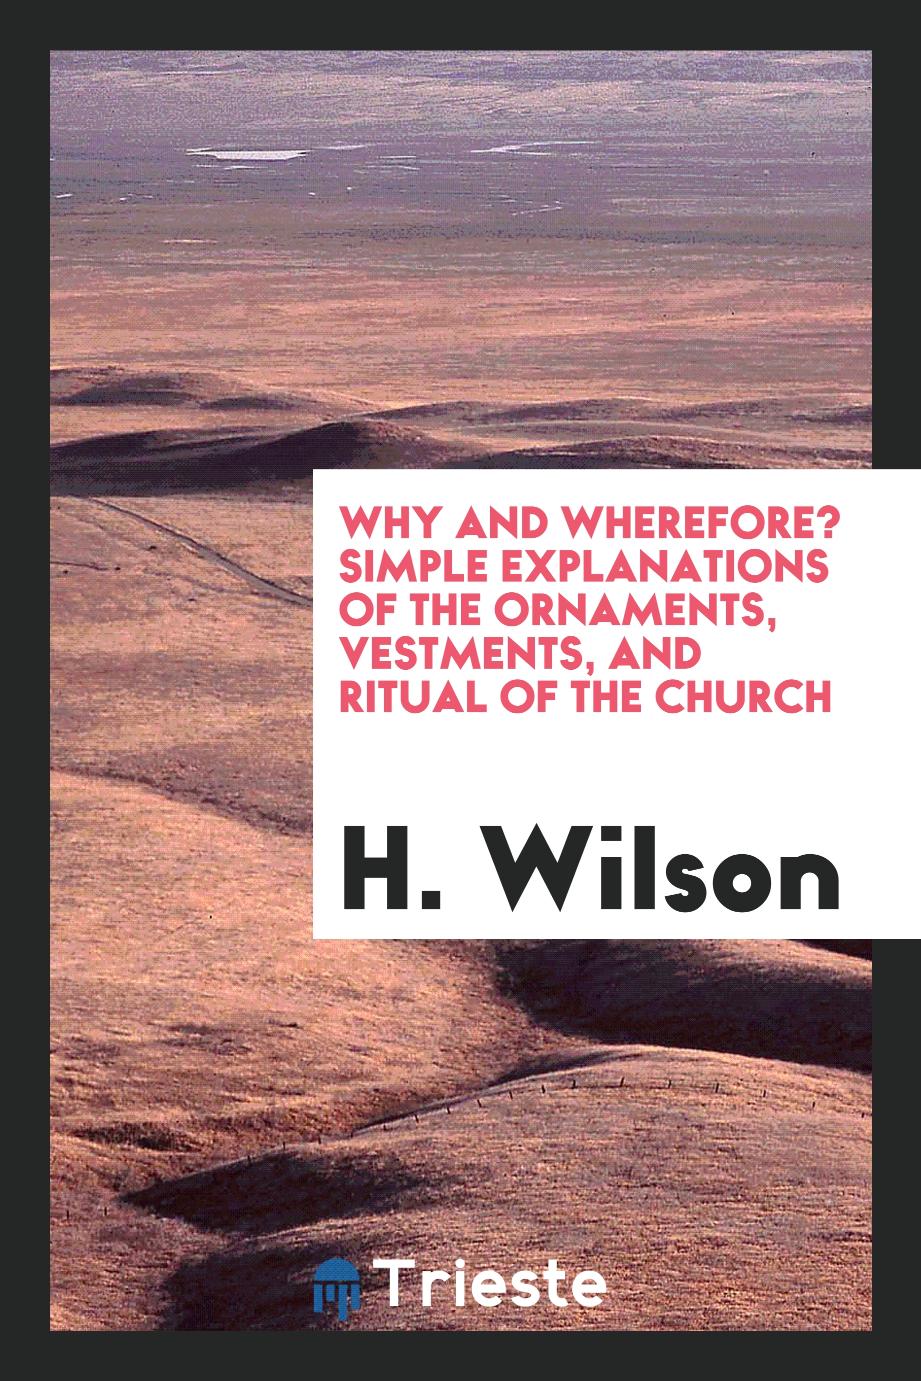 Why and Wherefore? Simple Explanations of the Ornaments, Vestments, and Ritual of the Church